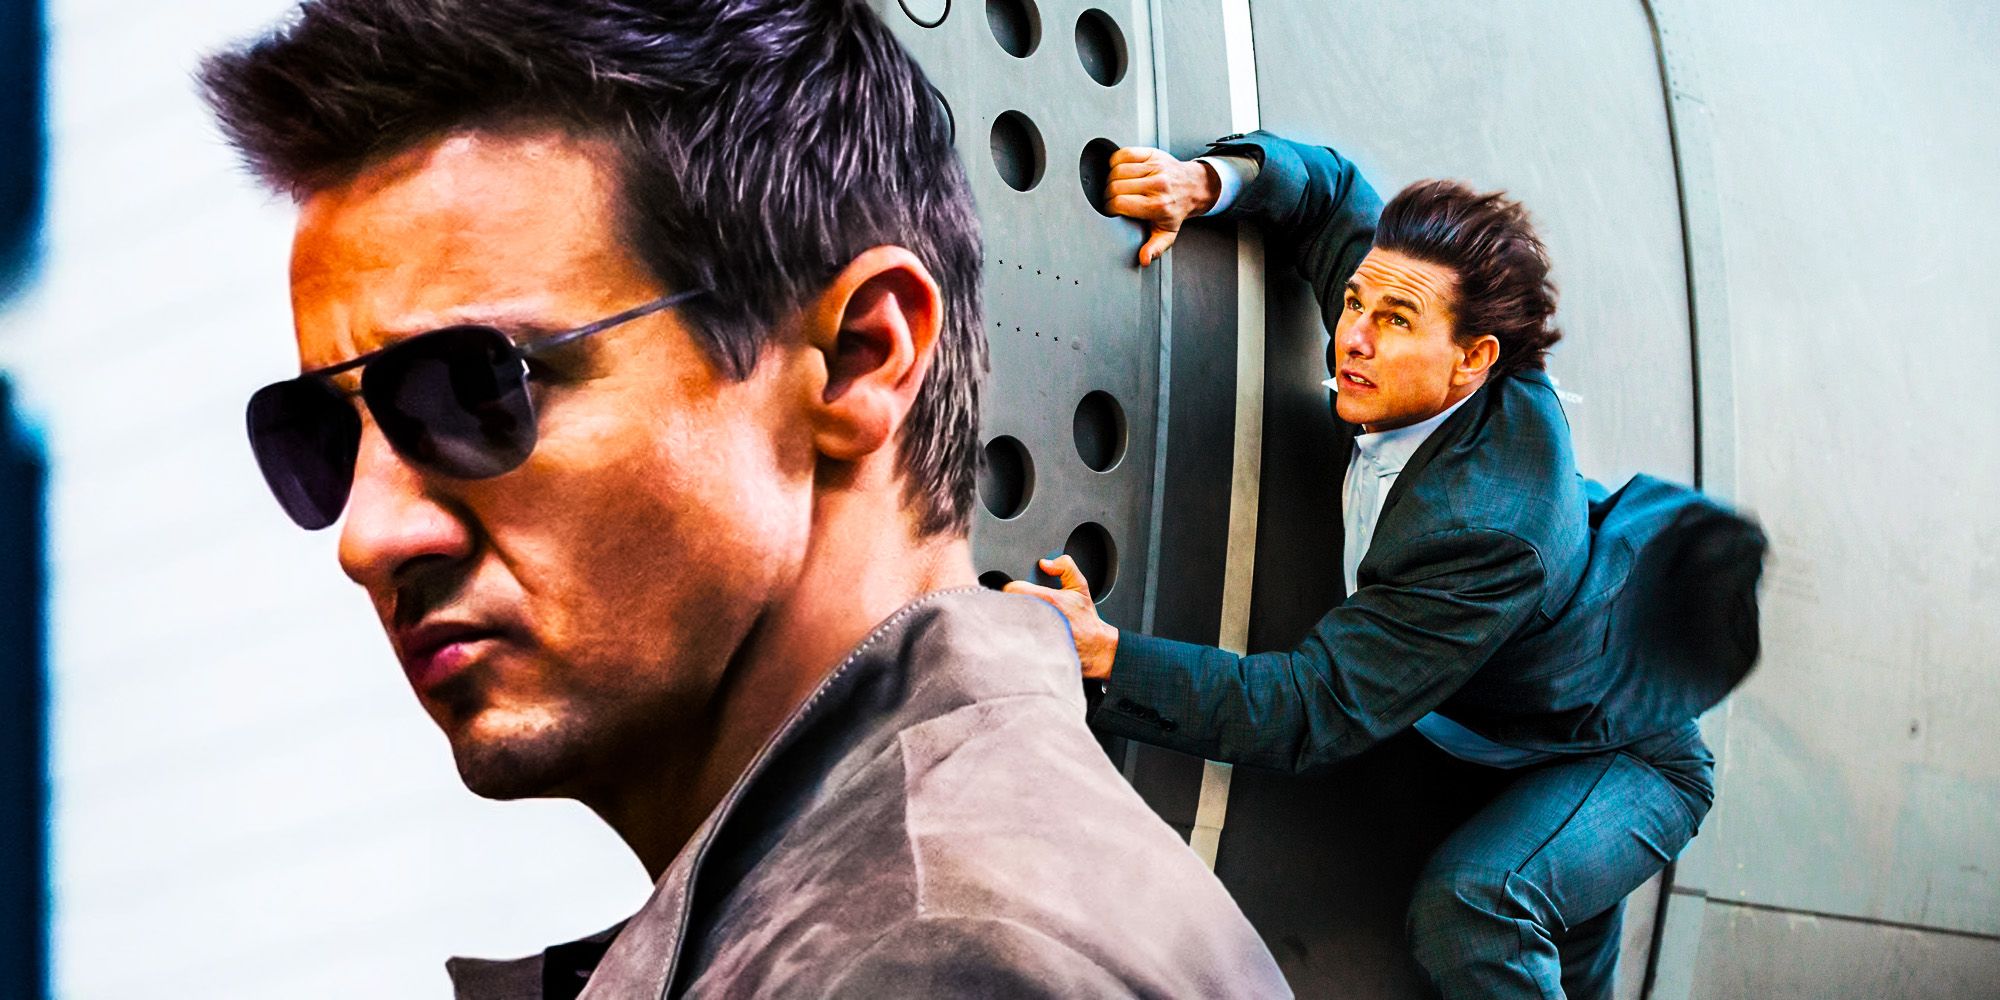 Mission impossible still a succes if jeremy renner took over